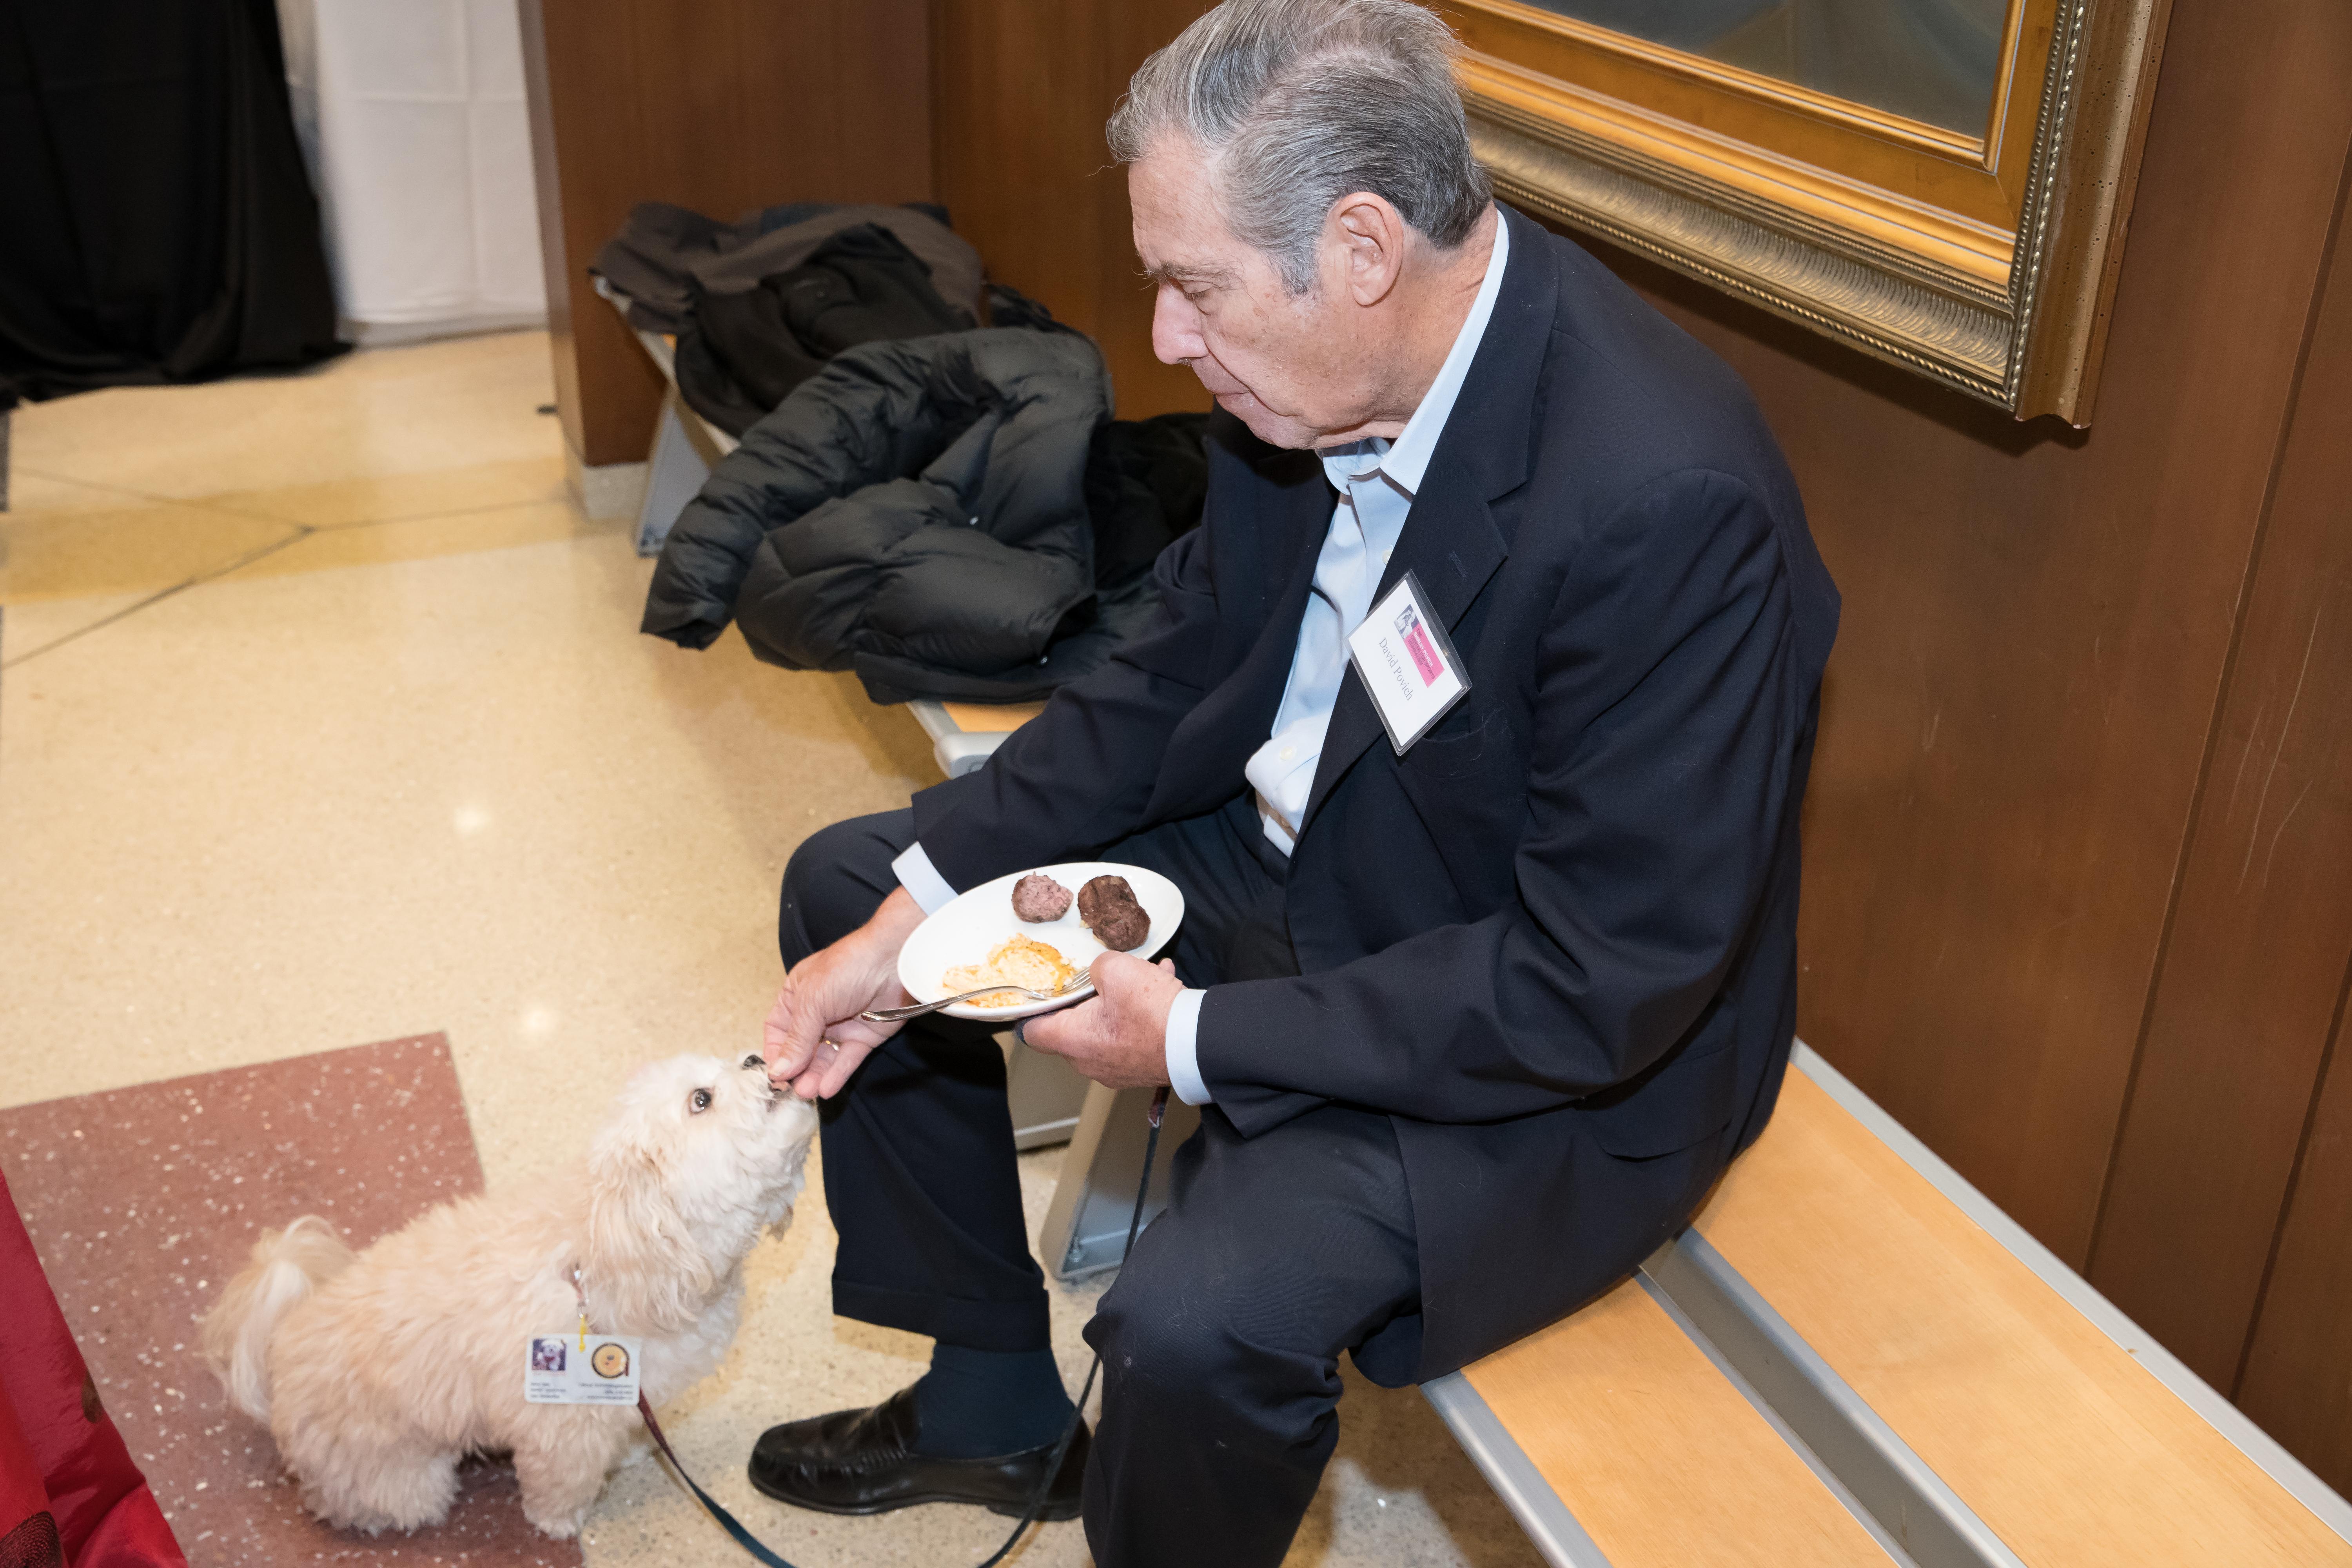 David Povich and his dog, Salty, we regulars at Povich Center events. 